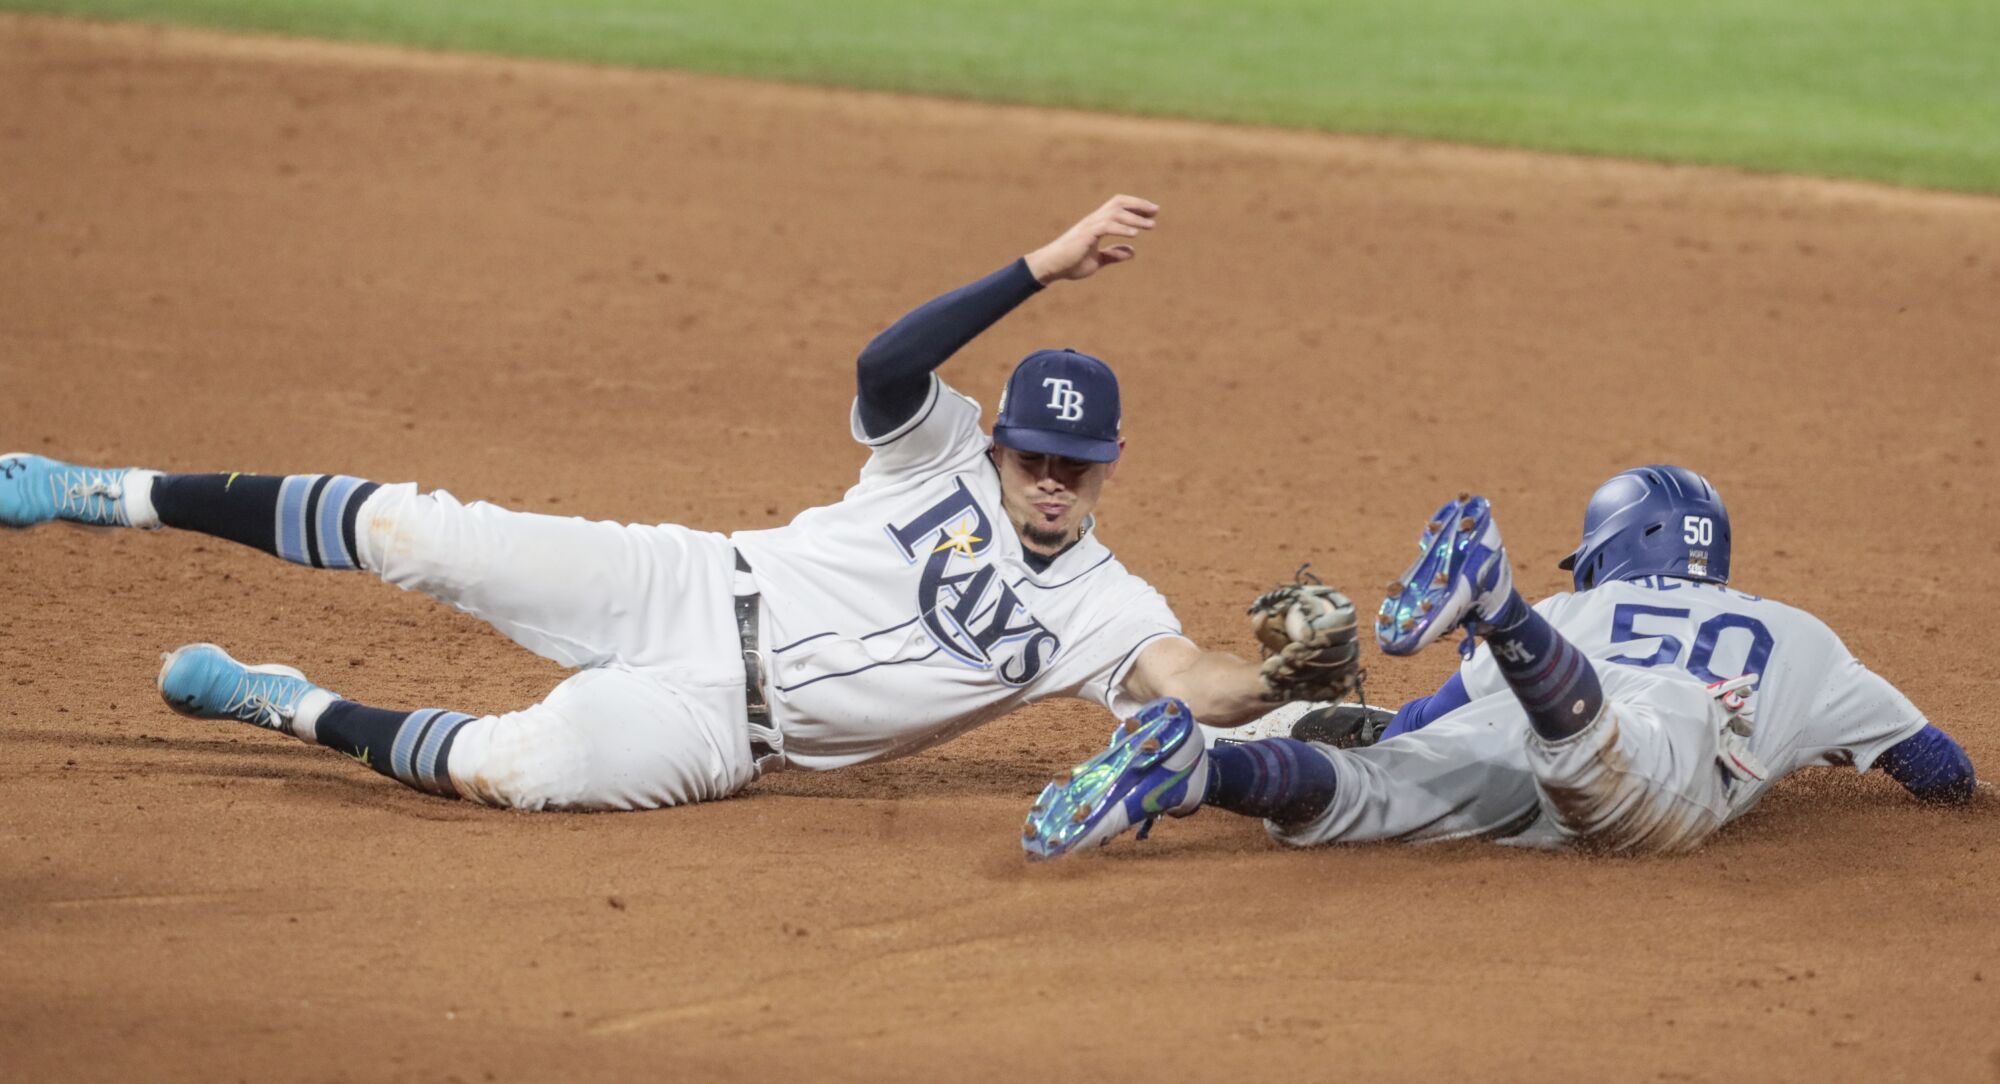 Dodgers baserunner Mookie Betts beats the tag by Tampa Bay Rays shortstop Willy Adames to steal second.